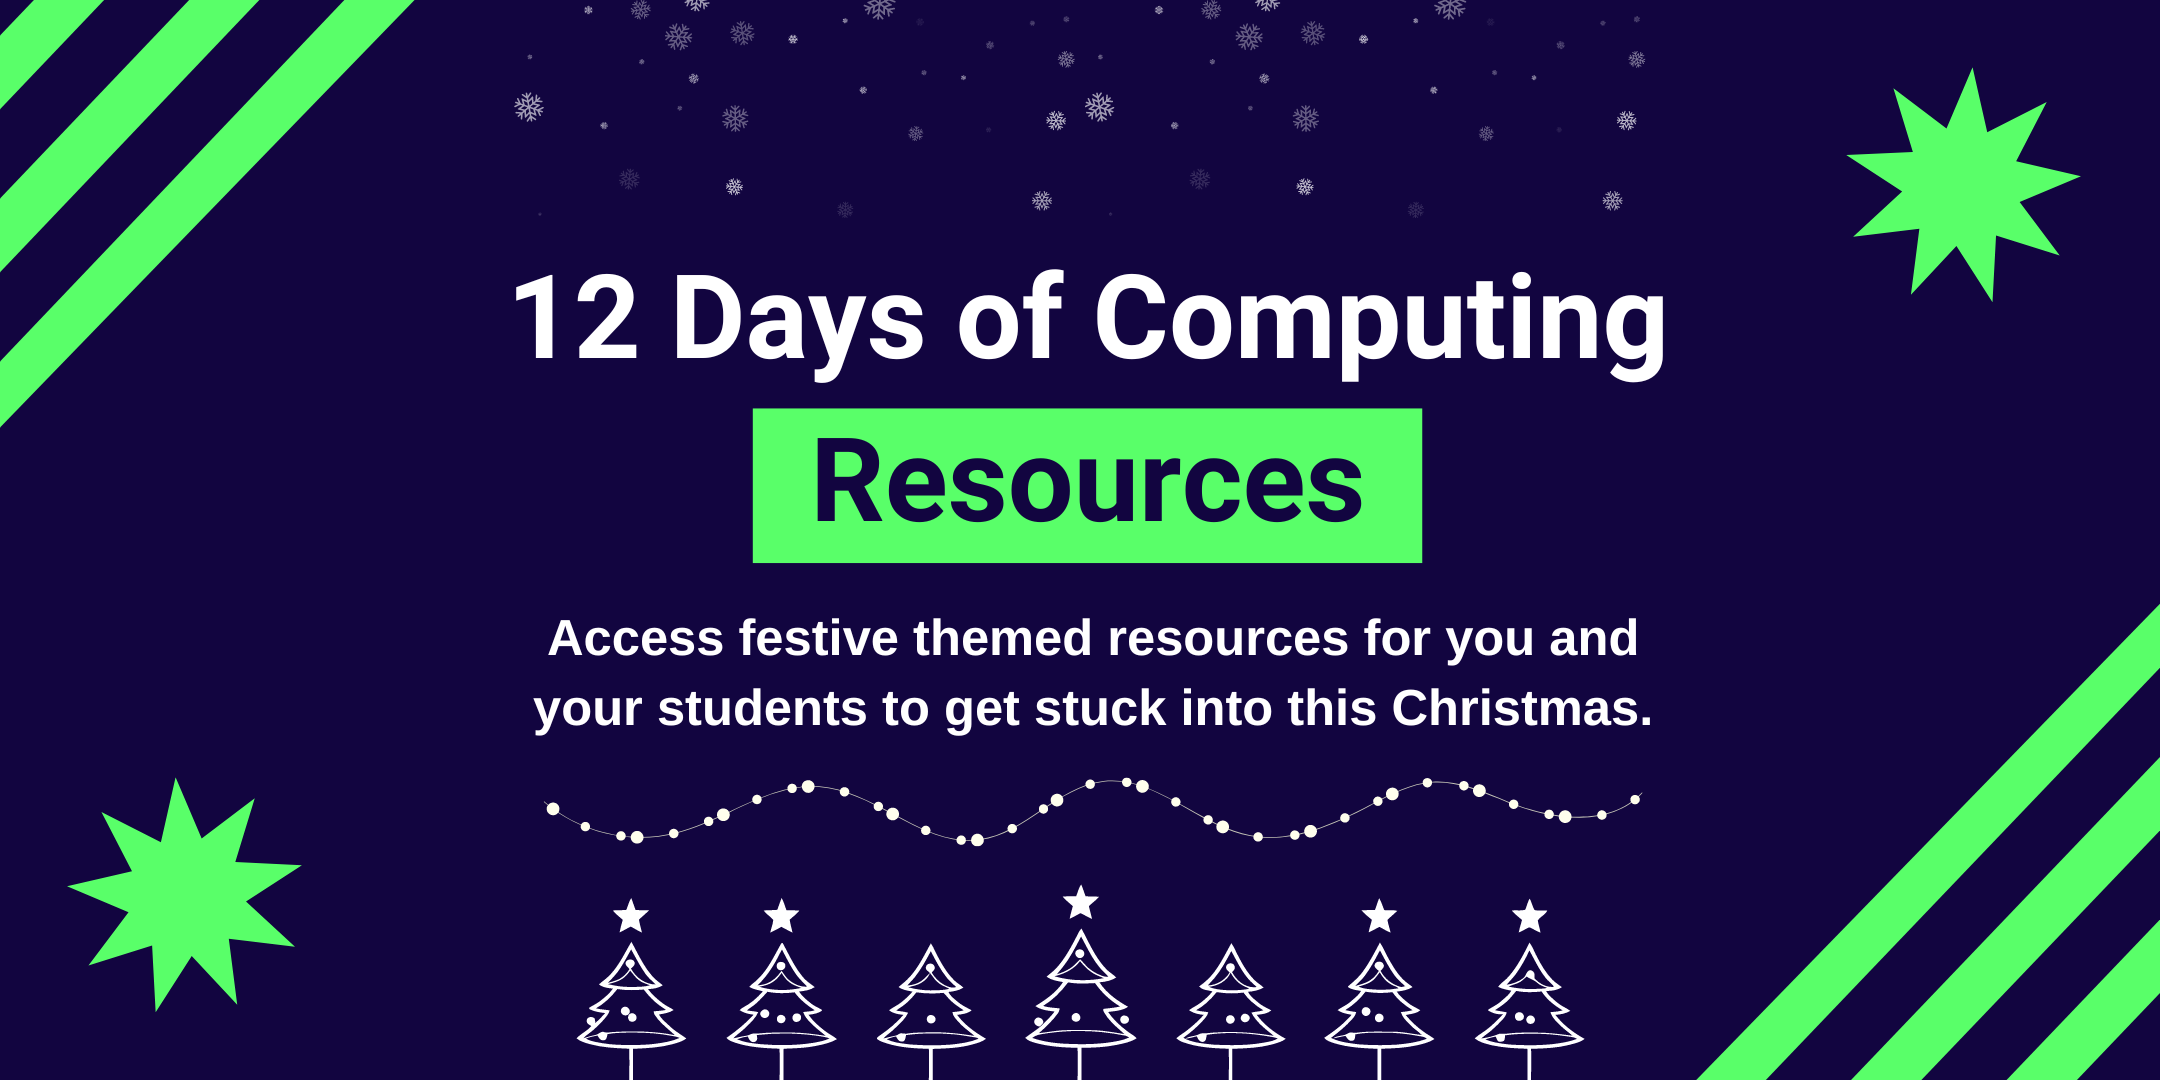 12 Days of Computing: Access festive themed resources for you and your students this Christmas.